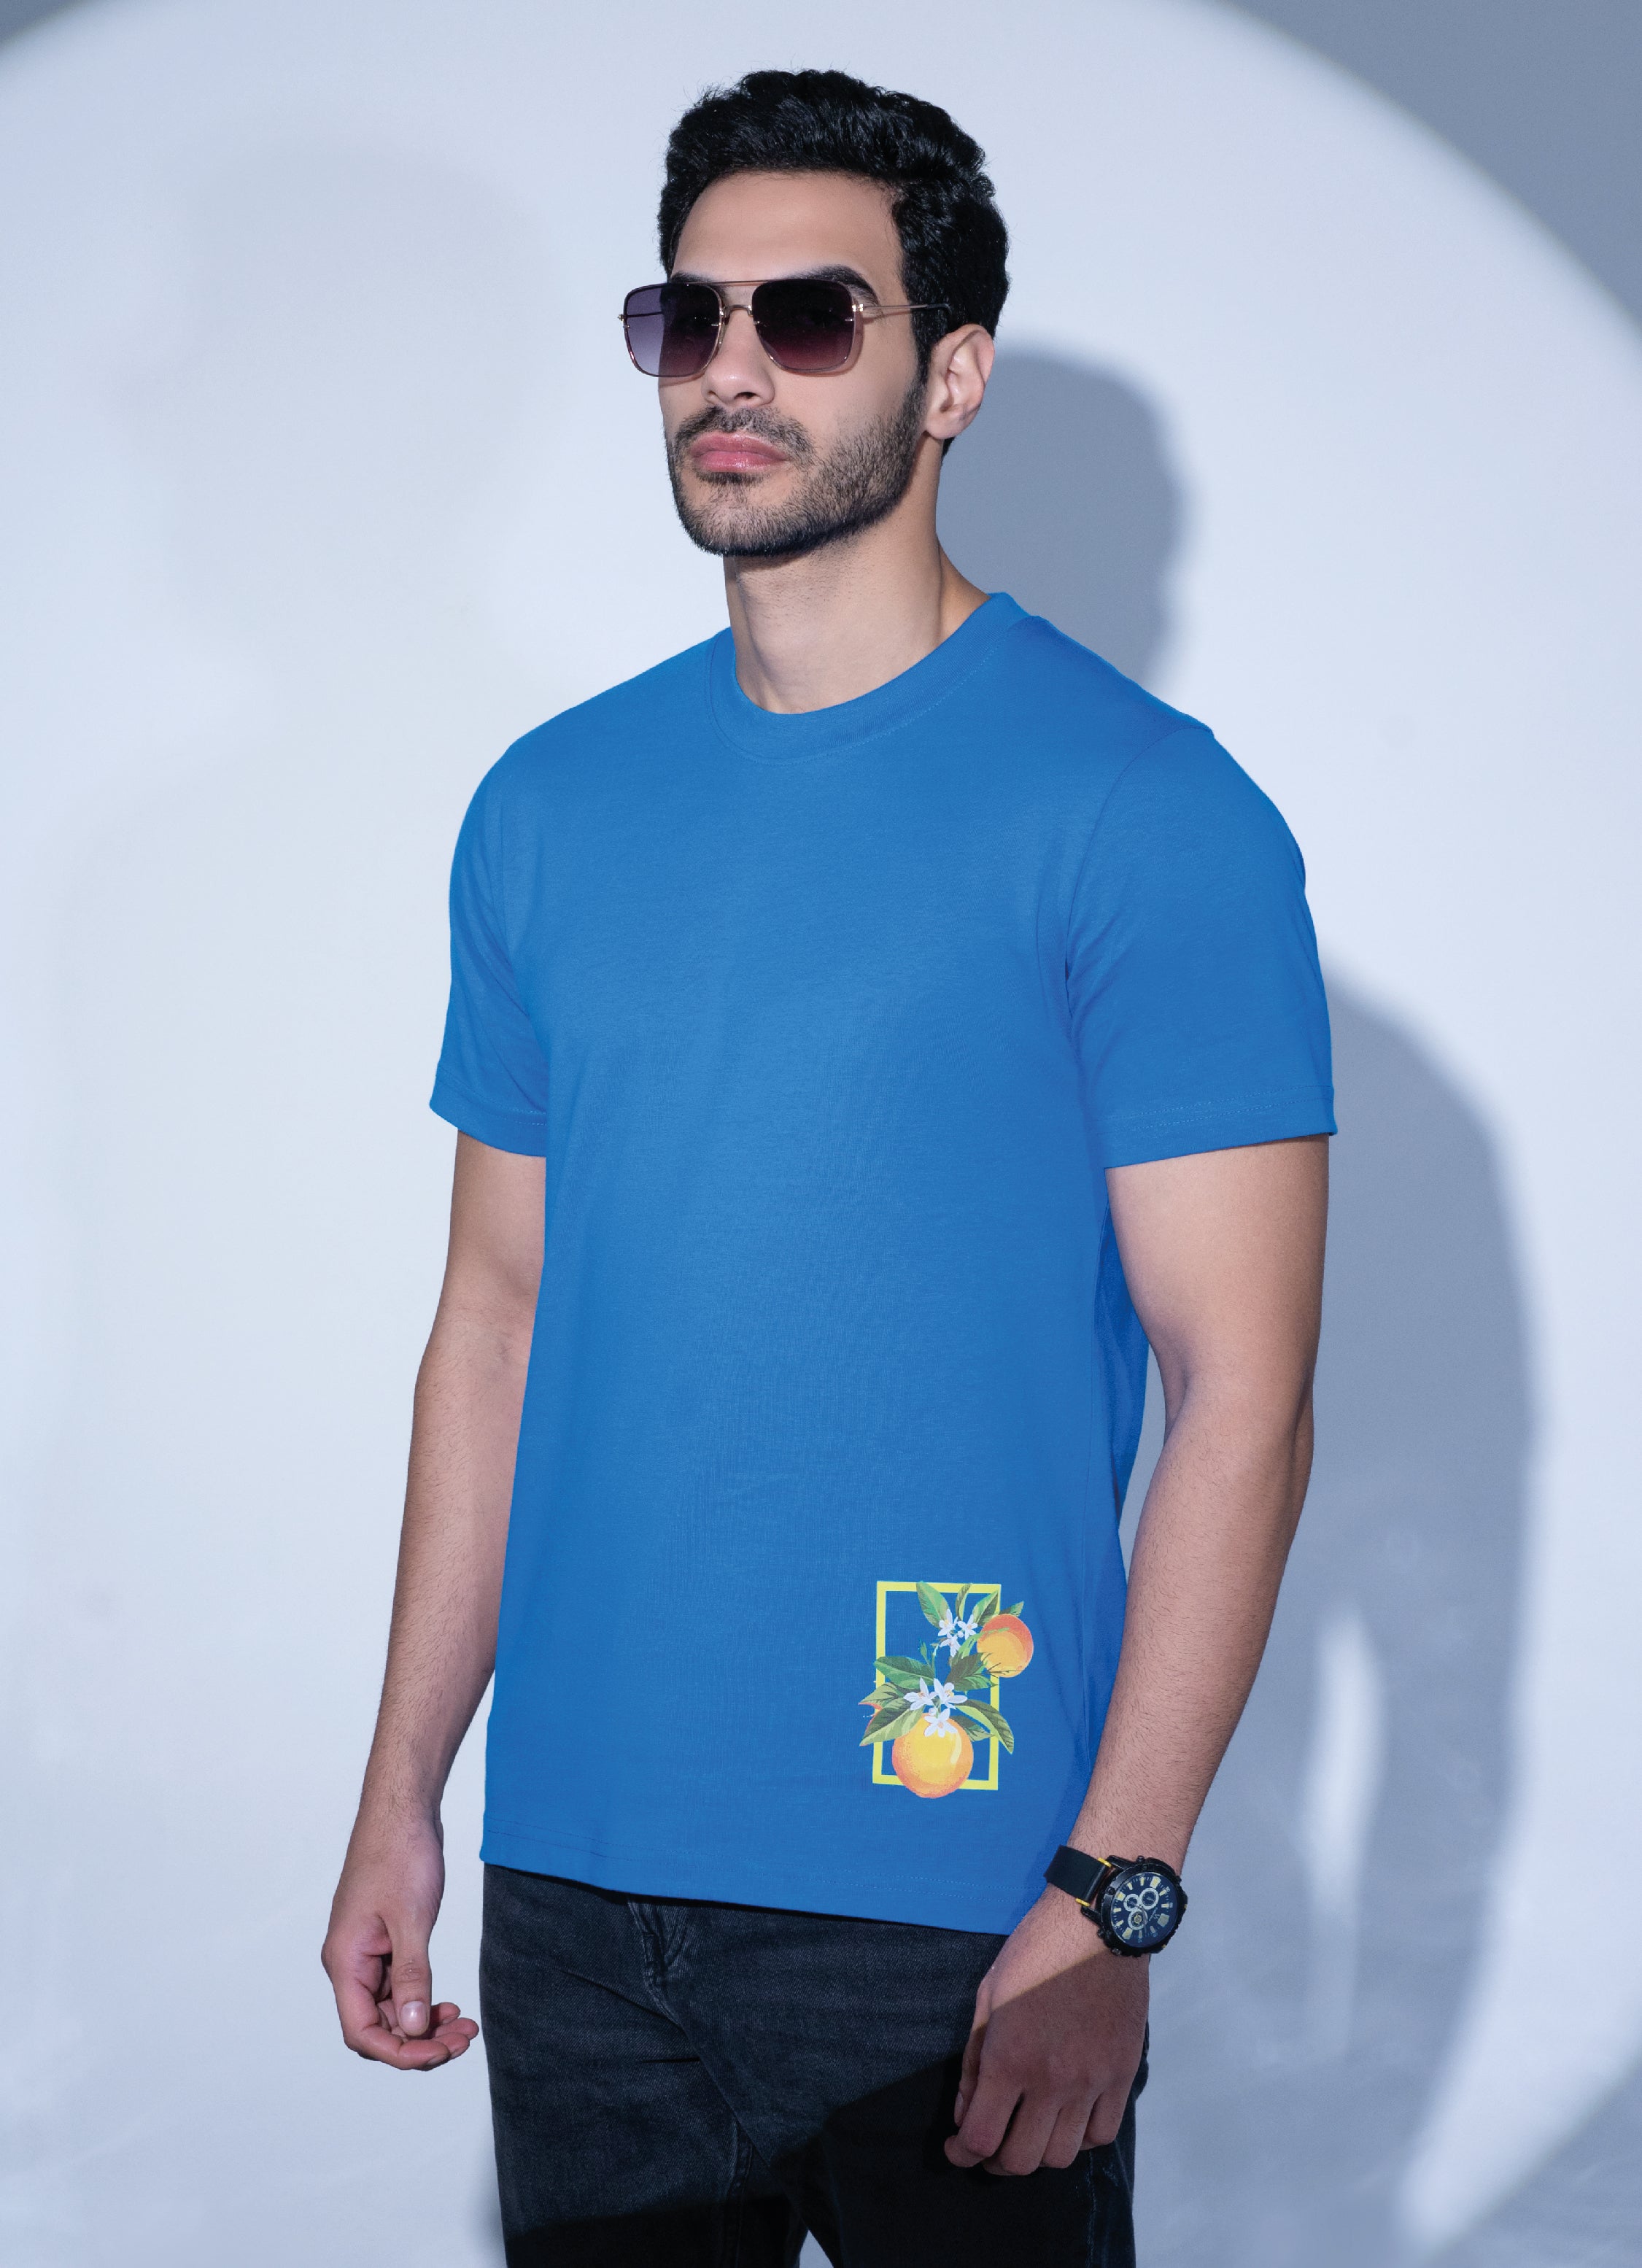 Buy Tangy Orange T-shirt - Blue - The 97thhour